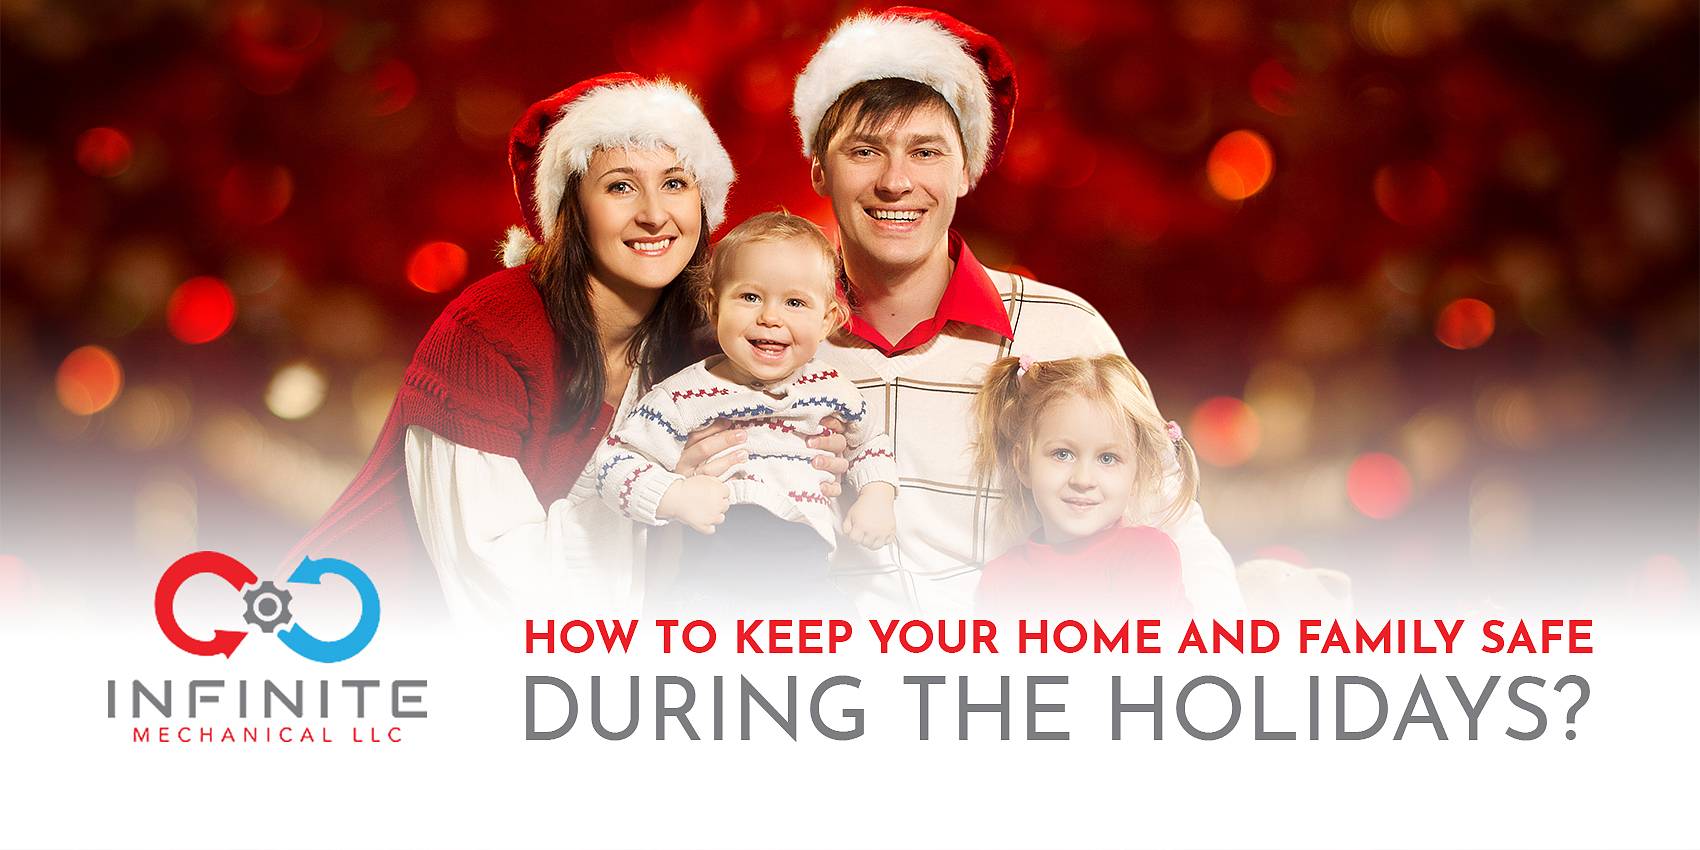 How to Keep Your Home and Family Safe During the Holidays?